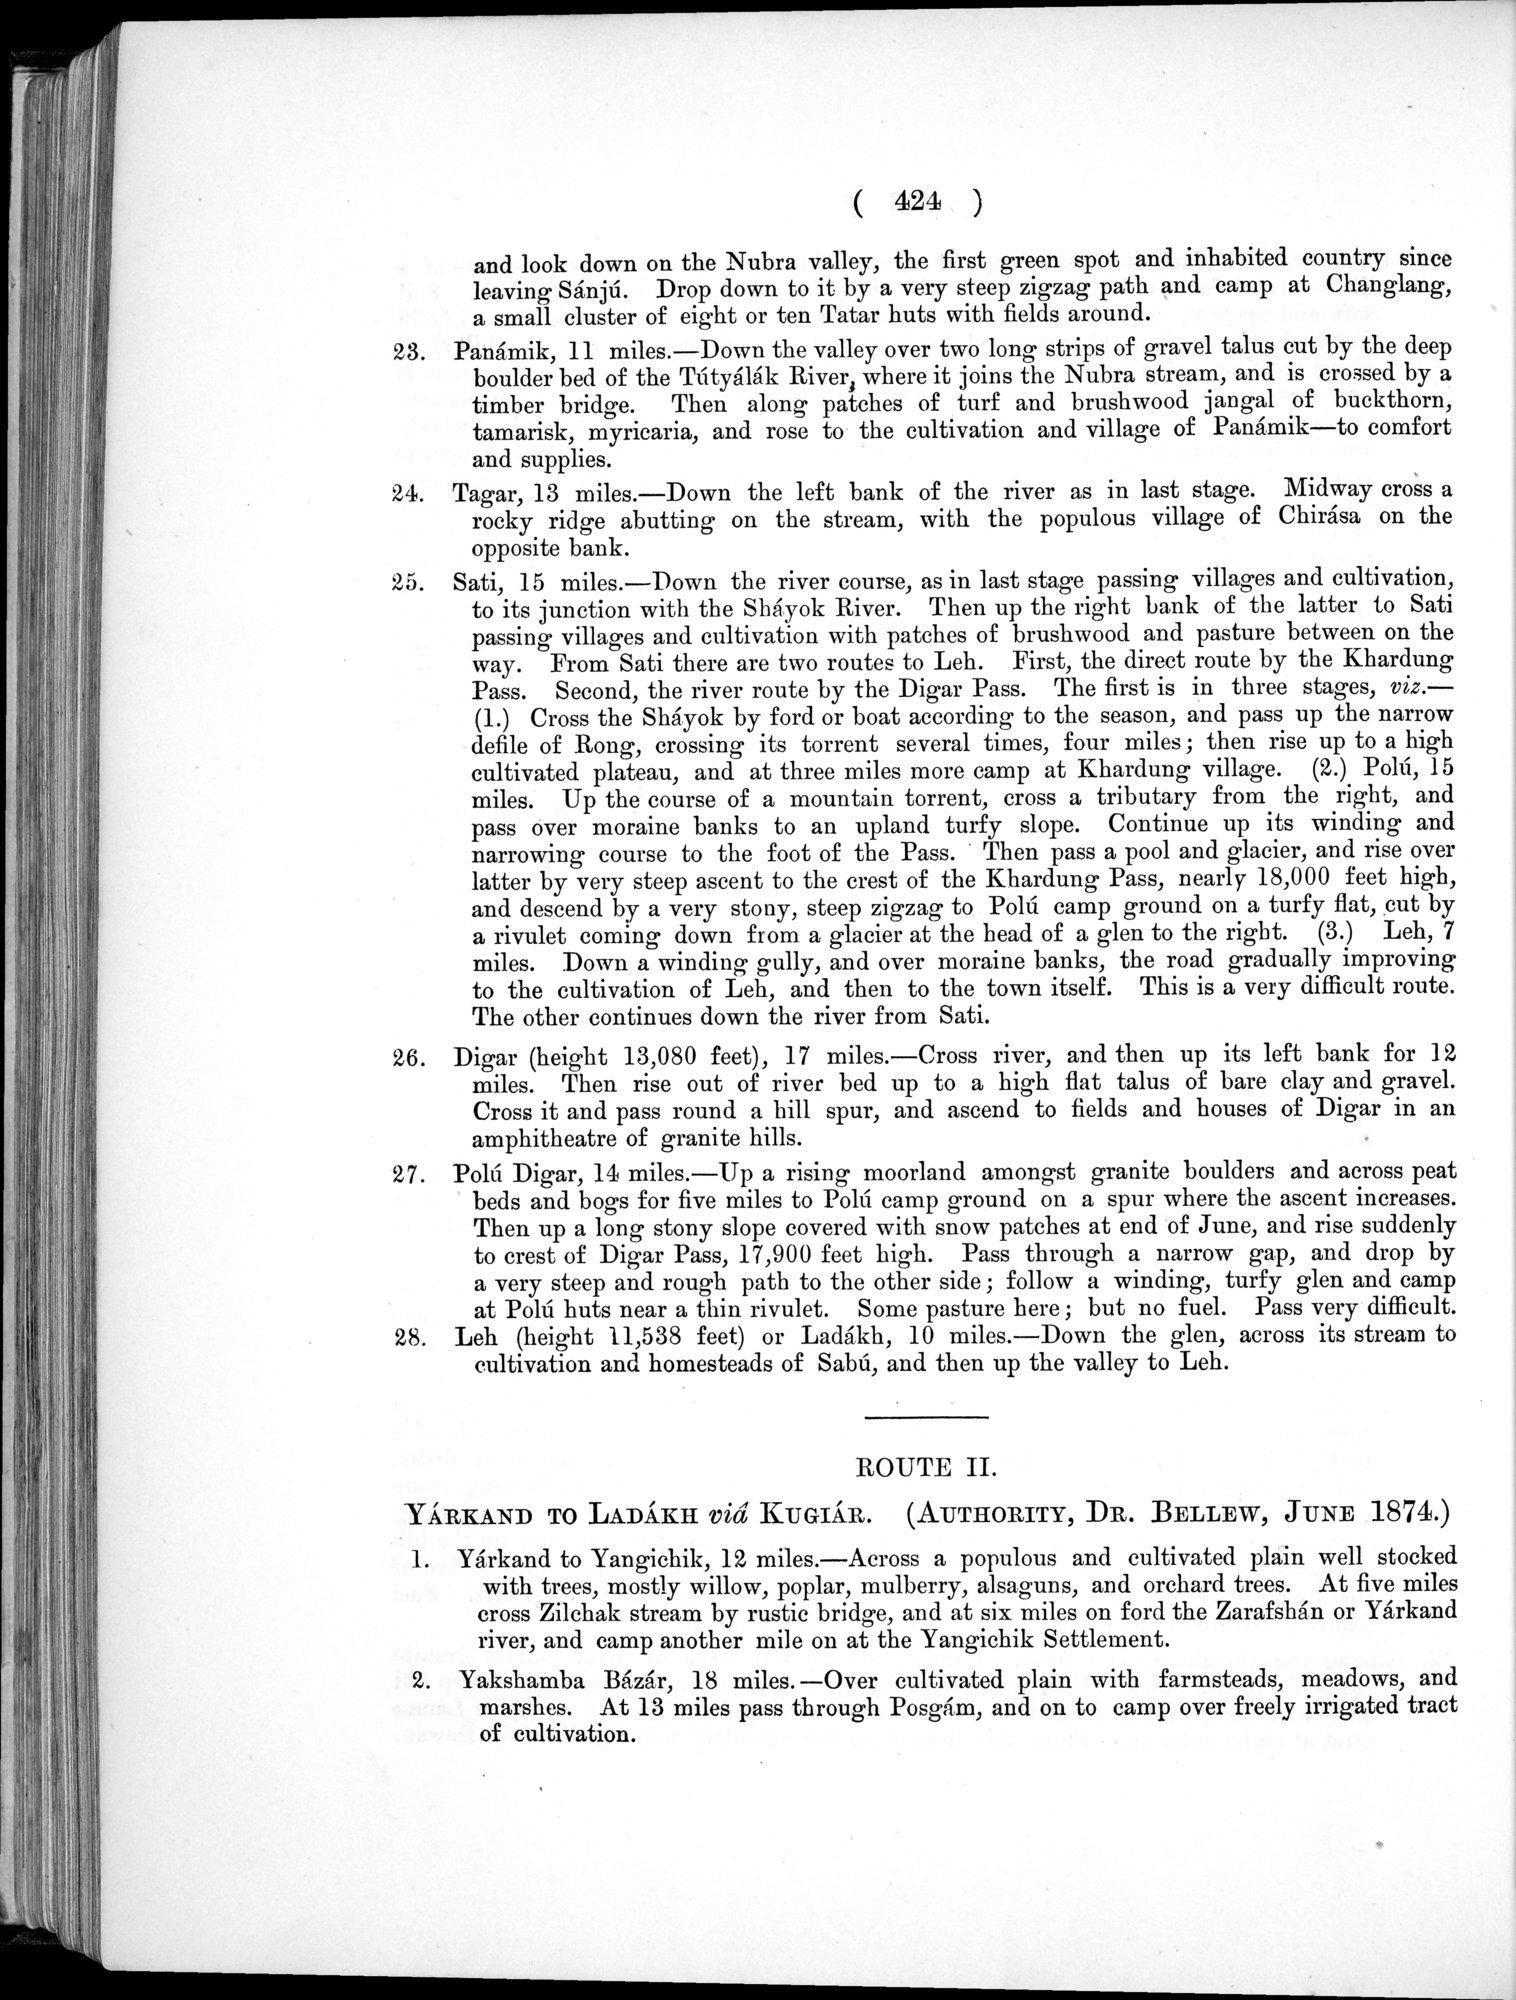 Report of a Mission to Yarkund in 1873 : vol.1 / Page 558 (Grayscale High Resolution Image)